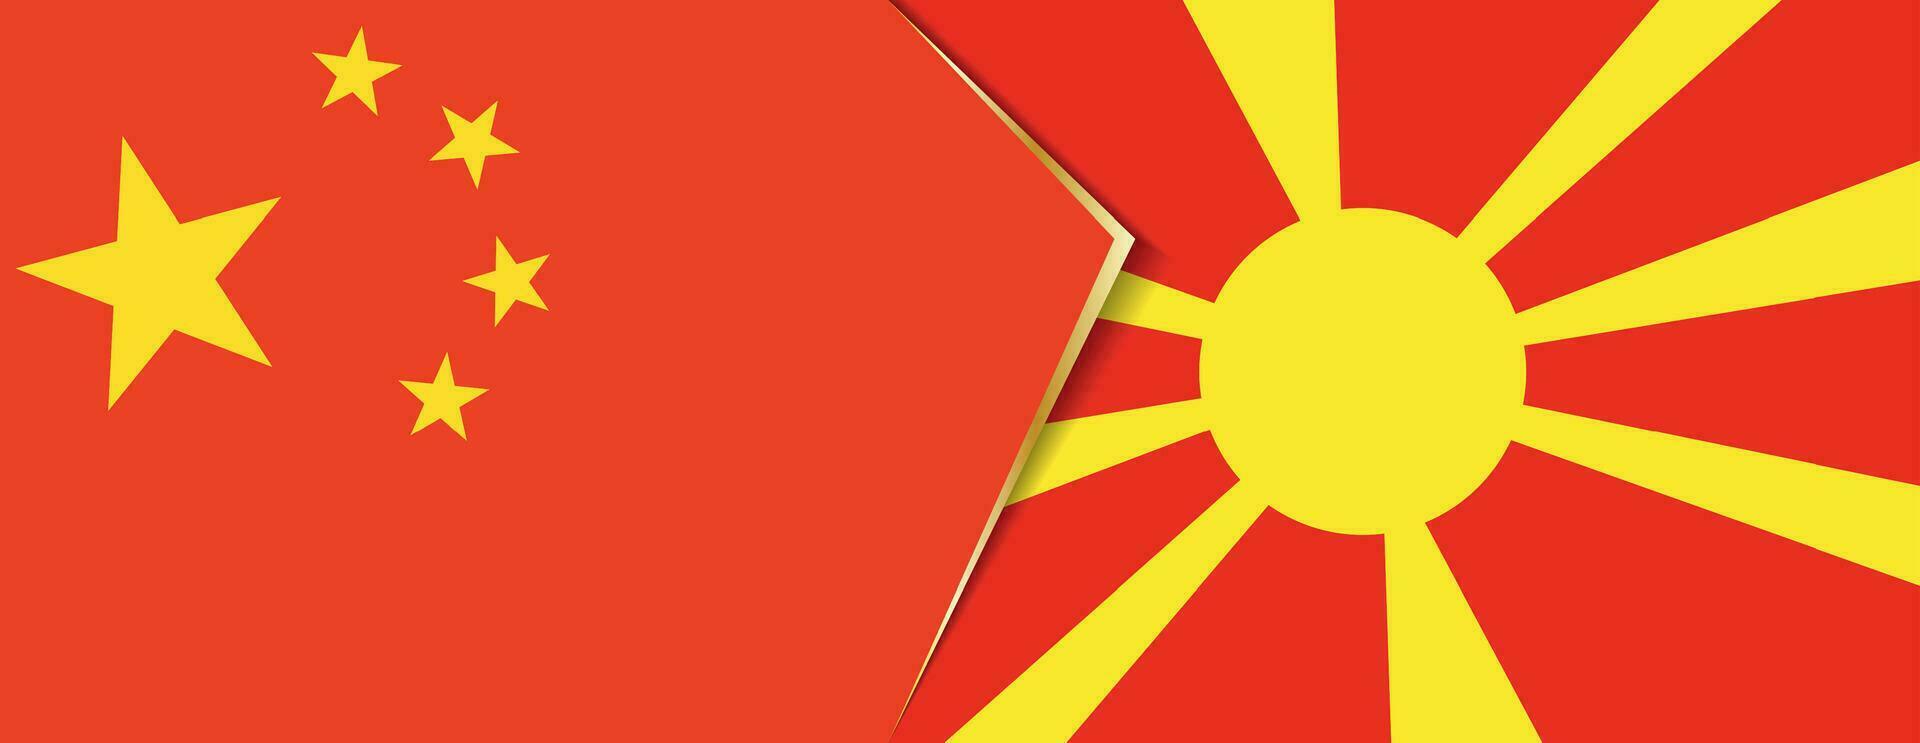 China and Macedonia flags, two vector flags.